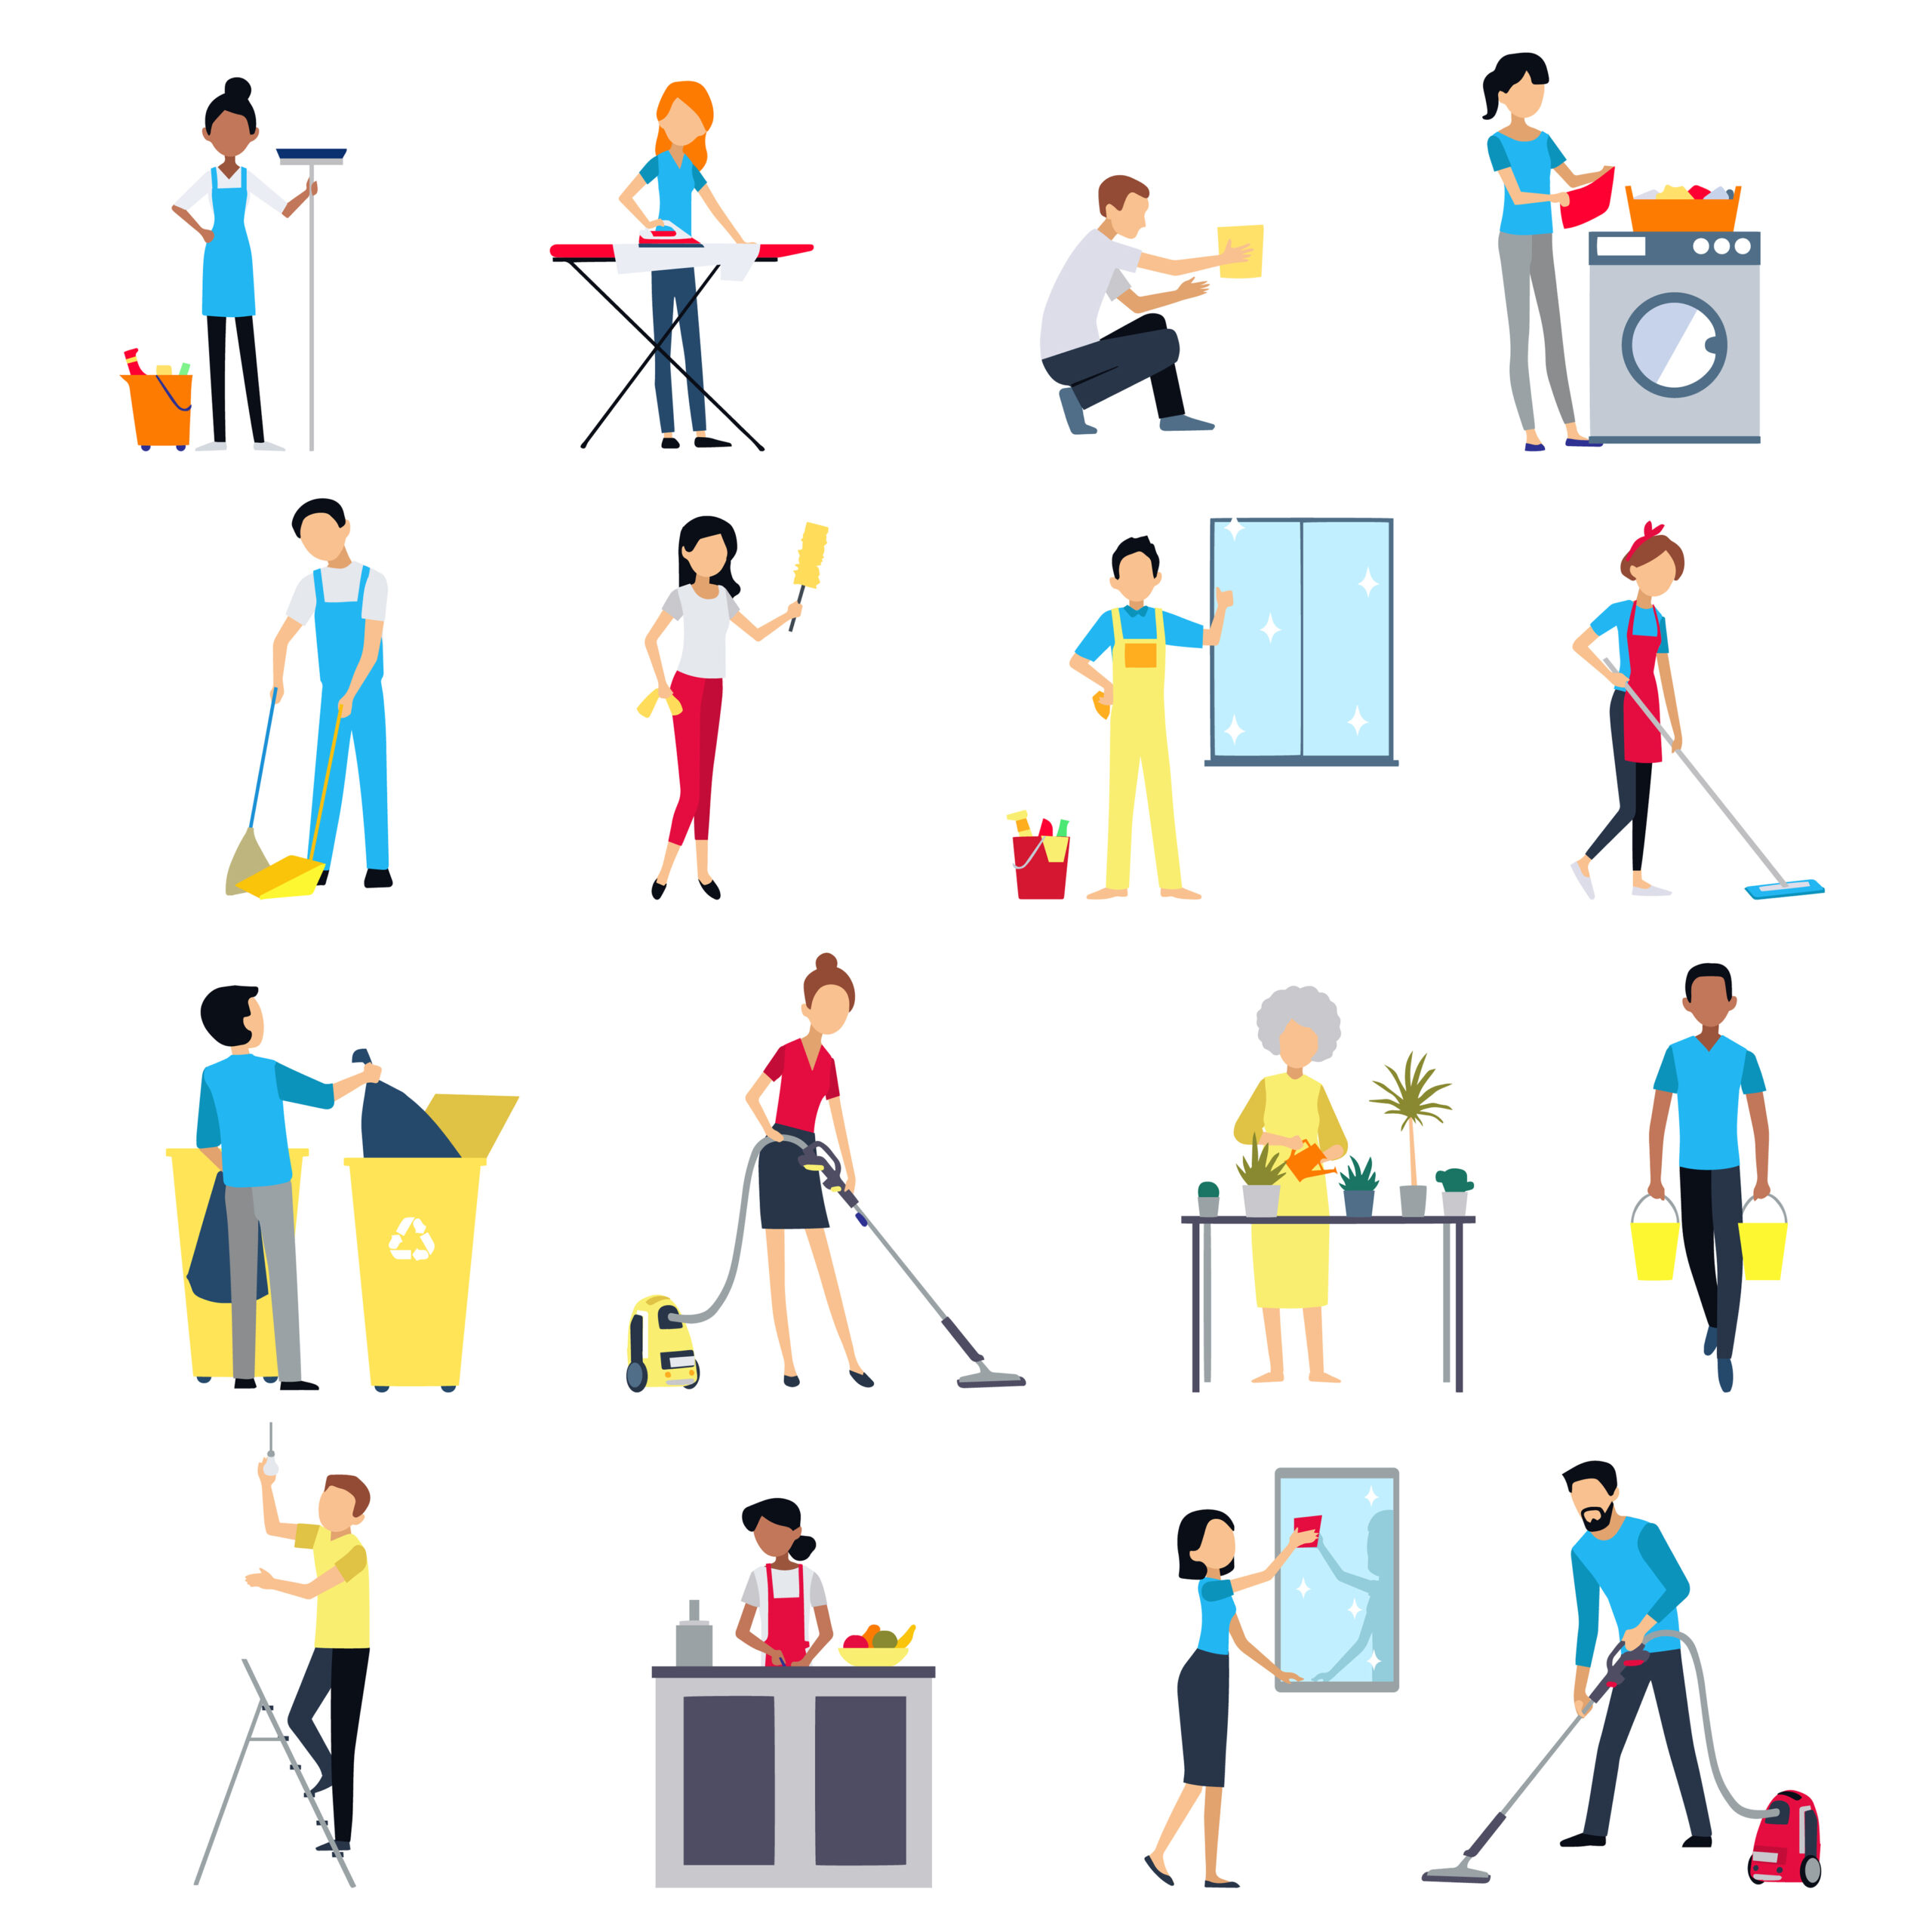 Cleaning people flat colored icons set with men and women house working cleaning washing isolated vector illustration